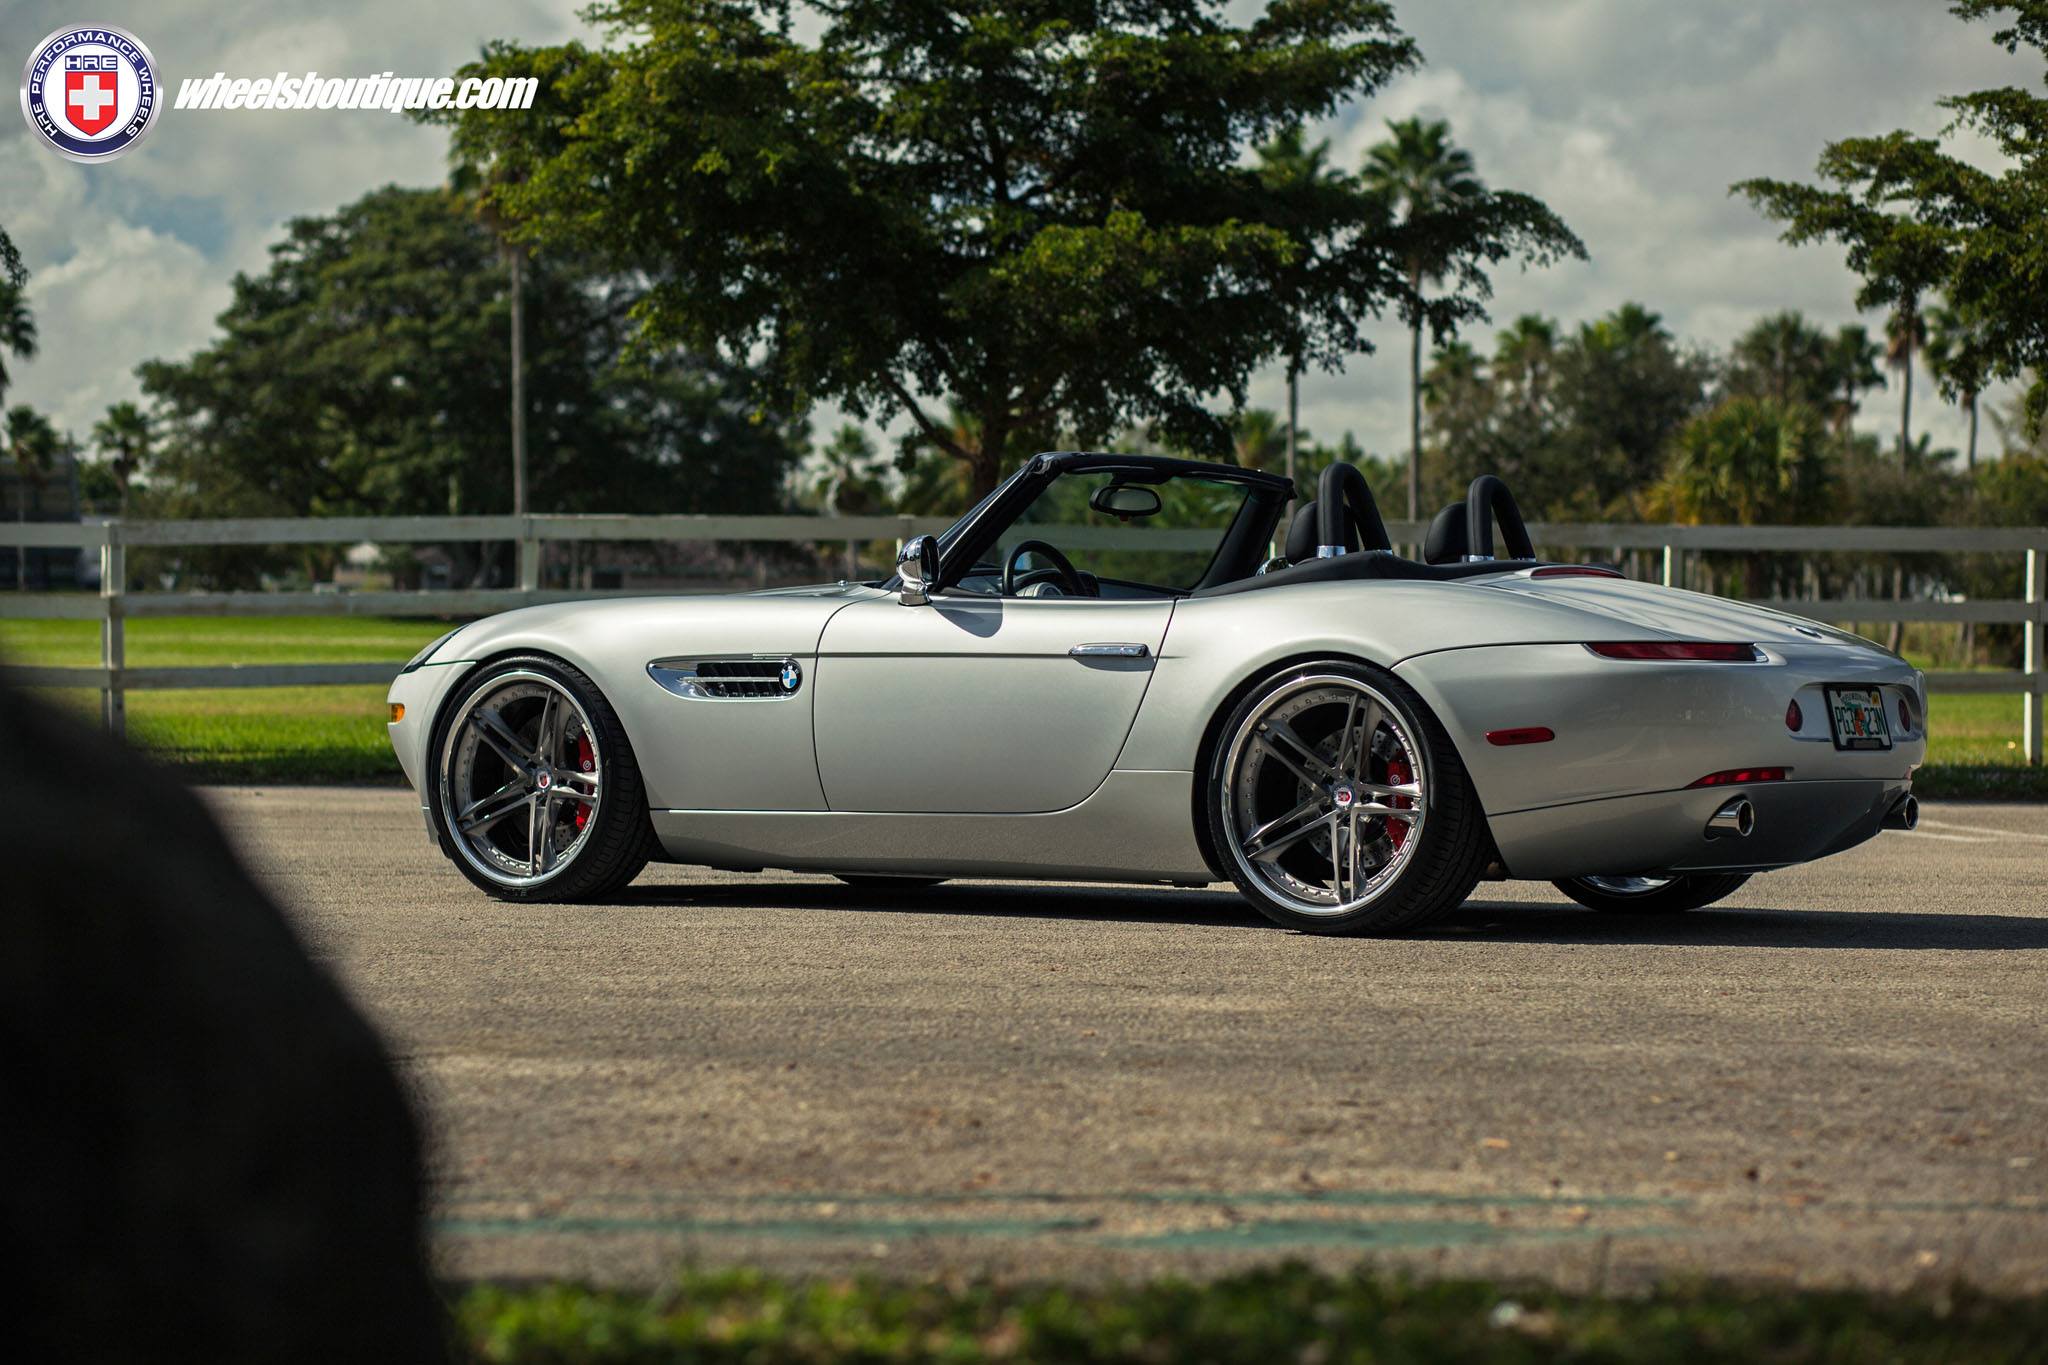 BMW Z8 Looks Marvelous with the HRE Wheels On